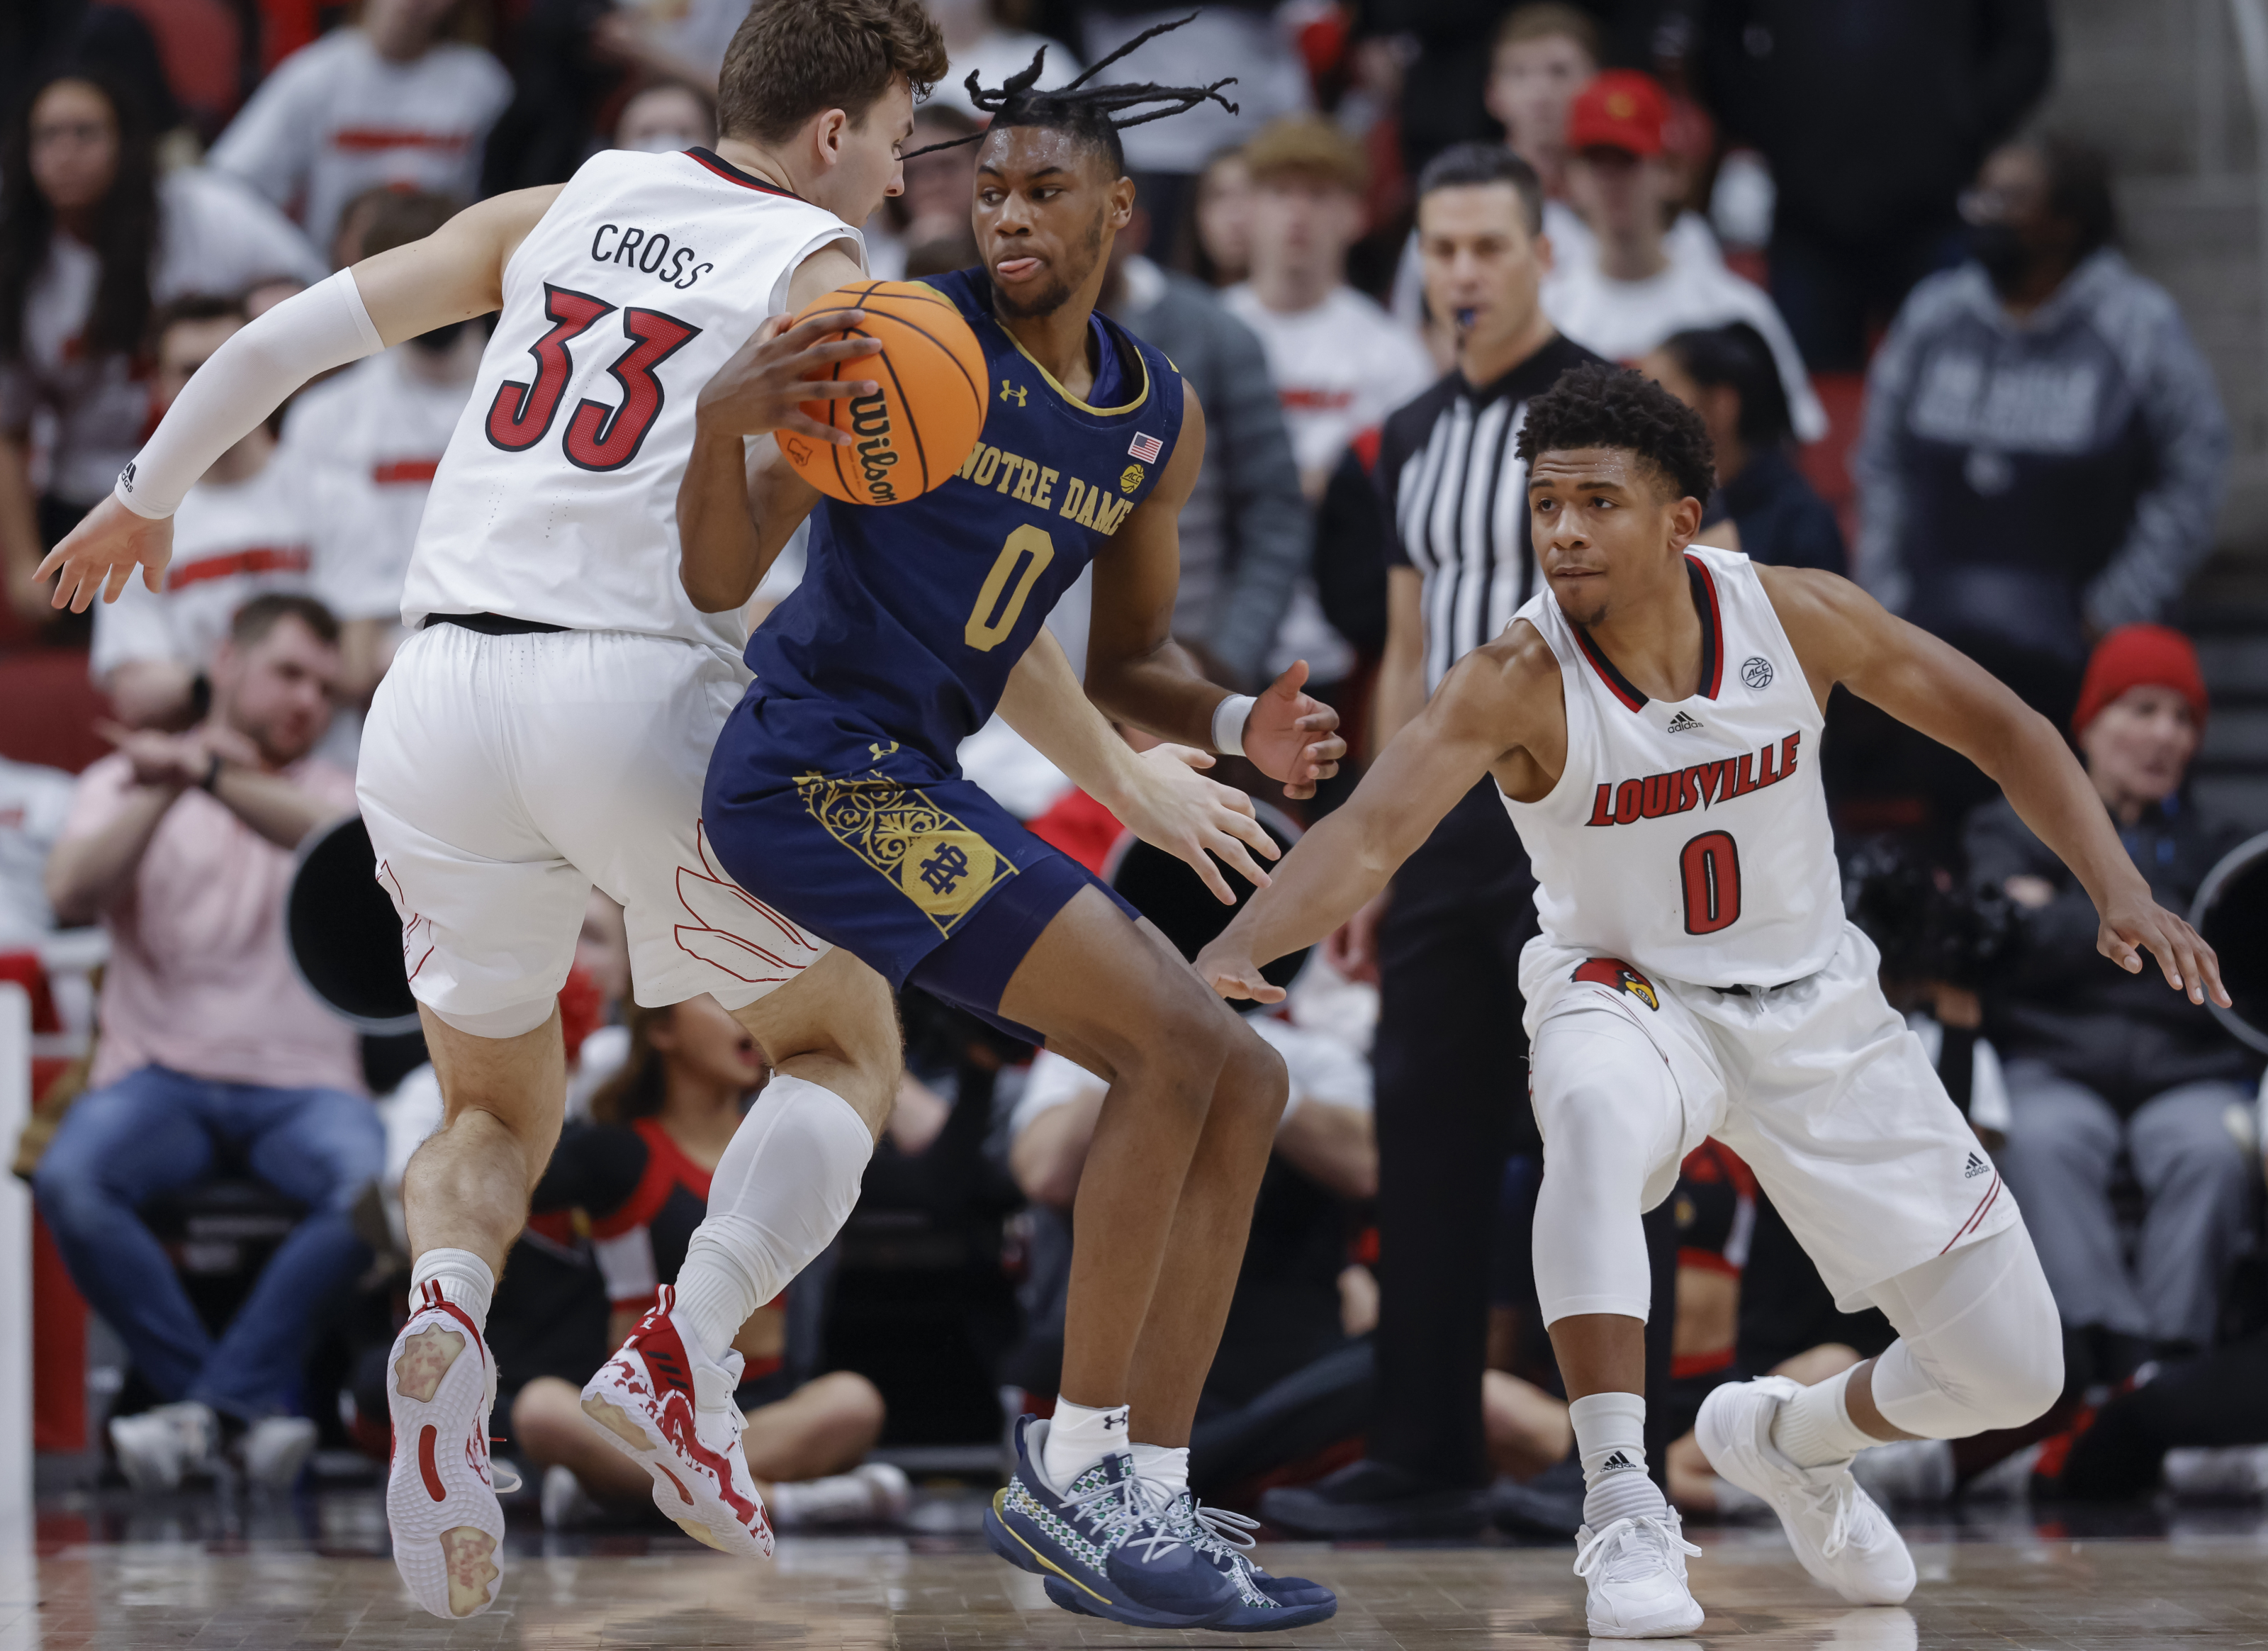 Notre Dame basketball Game Tonight Irish vs Louisville Line, Predictions, Odds, TV Channel and Live Stream for Basketball Game Feb